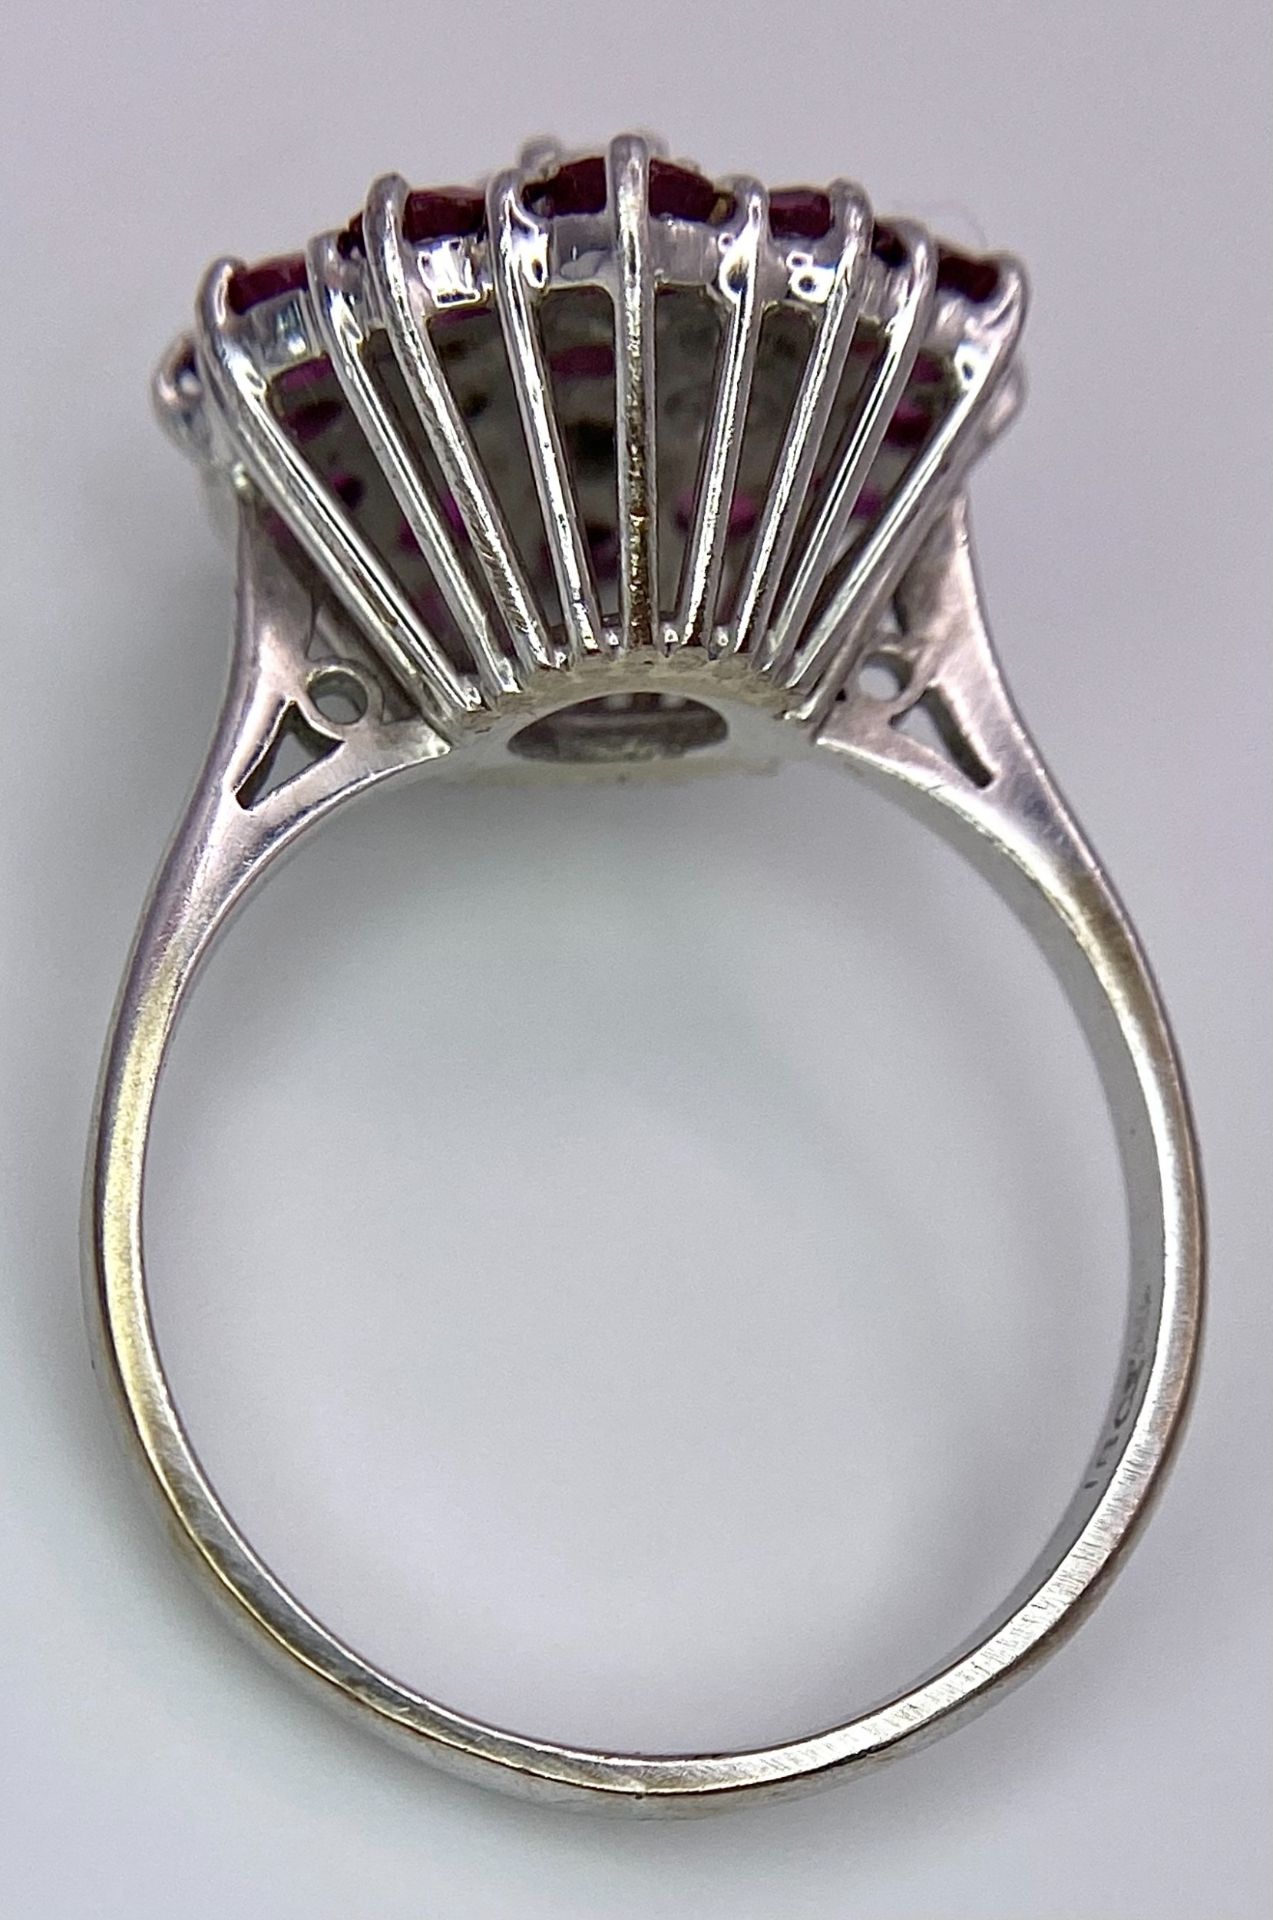 A Gorgeous 18K White Gold, Ruby and Diamond Ring. Floral design on an elevated setting. 14 rubies - Image 3 of 6